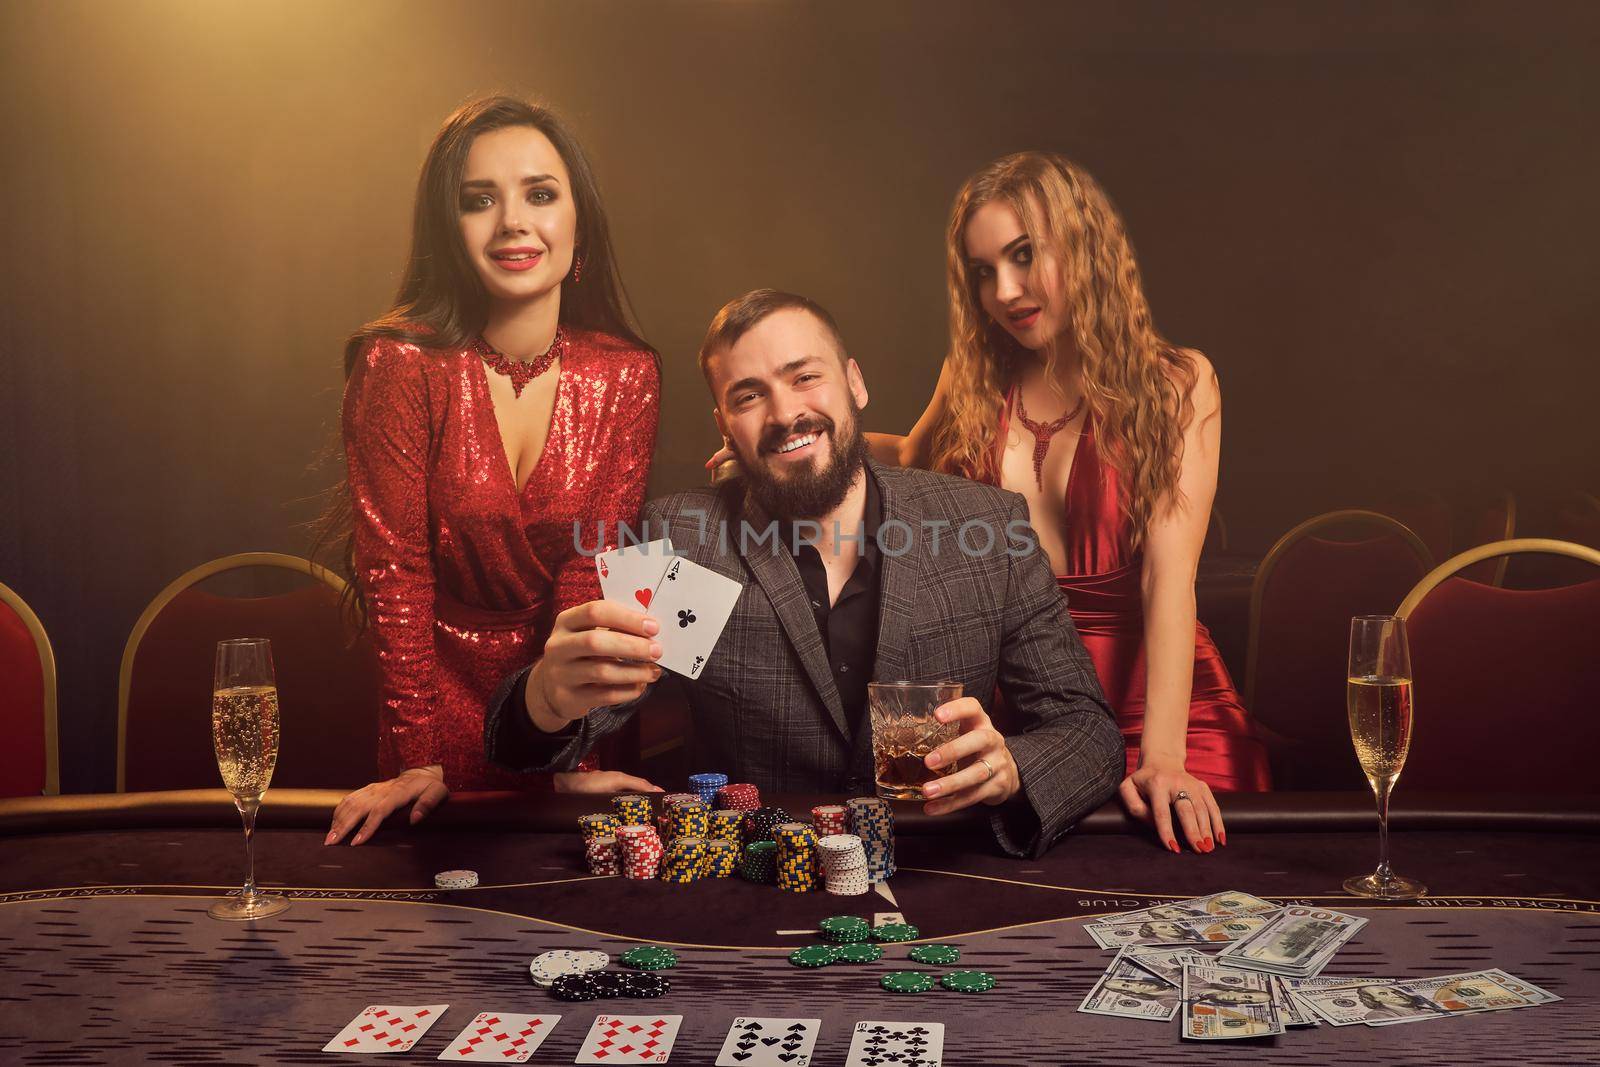 Two sexy women and handsome man are playing poker at casino. They are showing the winning combination, smiling and looking at the camera while posing at the table against a yellow backlight on smoke background. Cards, chips, money, gambling, entertainment concept.